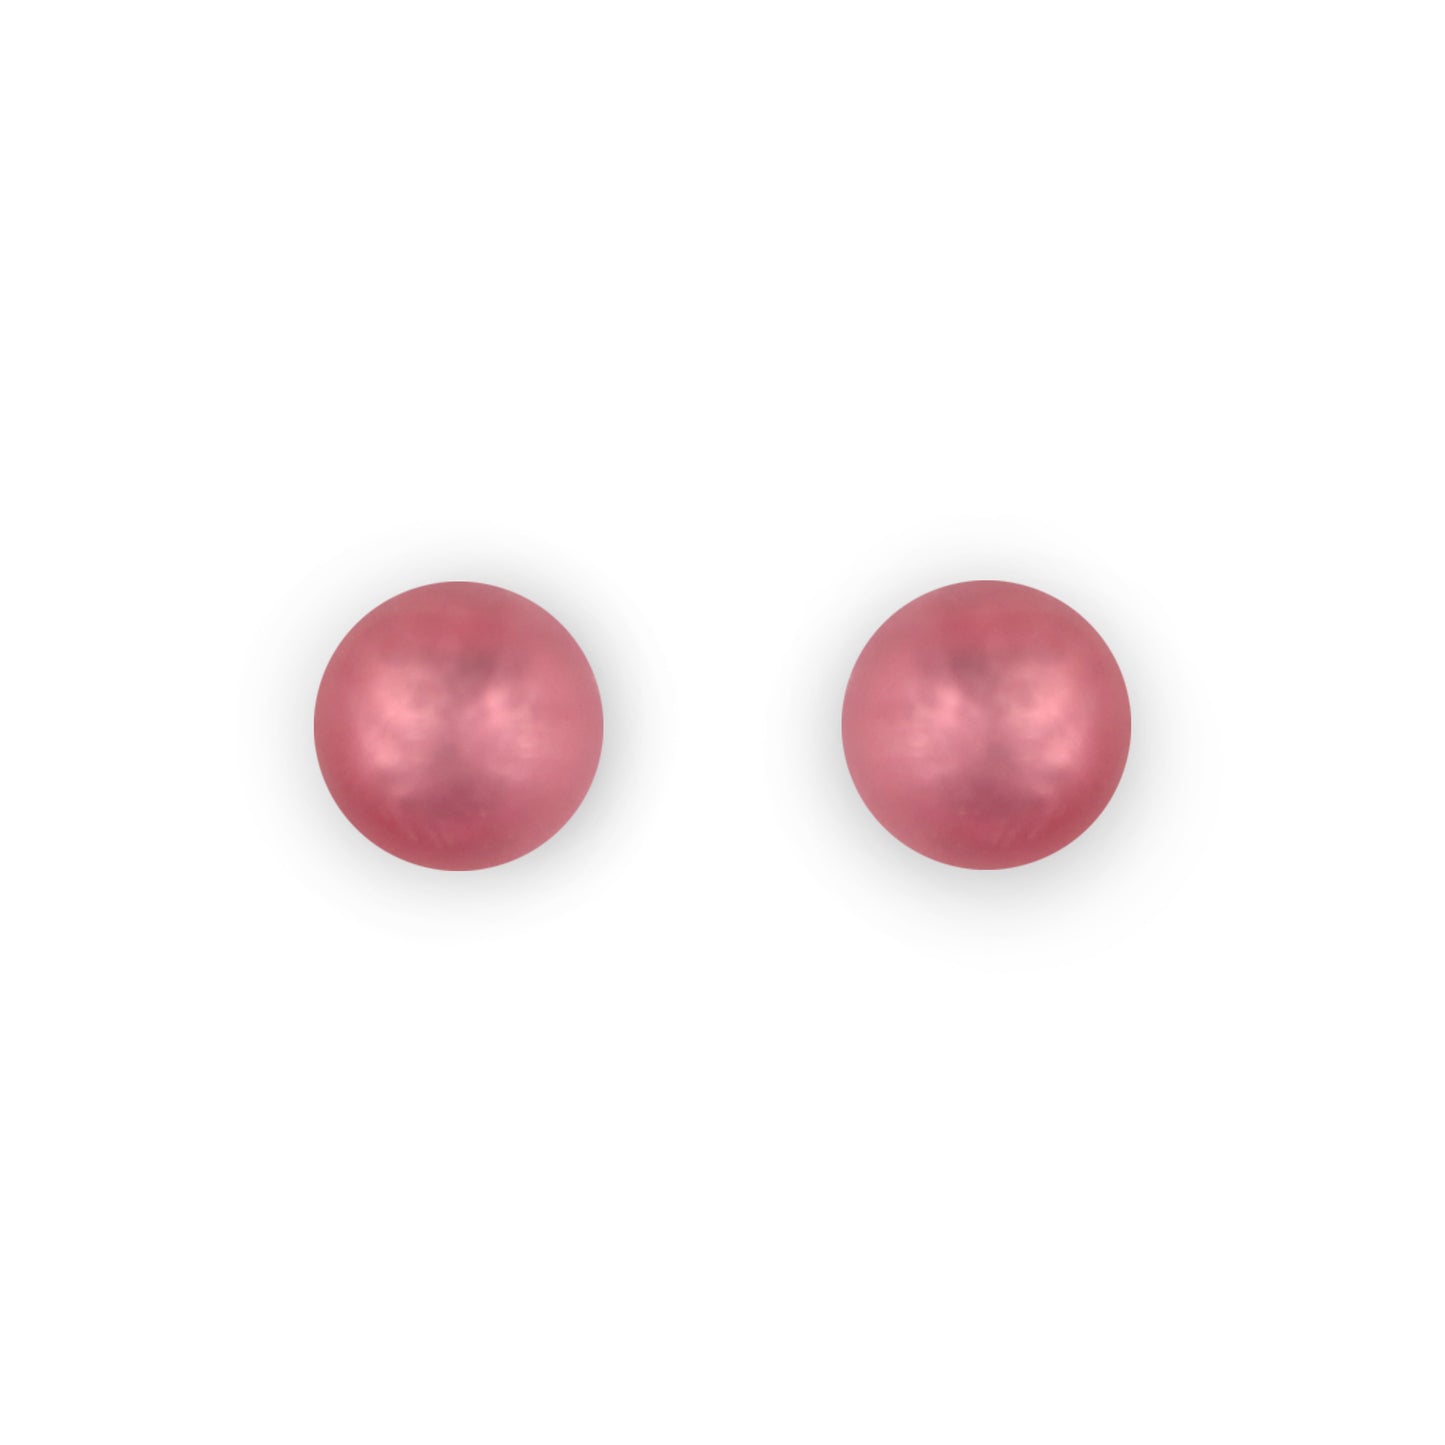 Coral Cabouchon Matte Small Stud Earrings